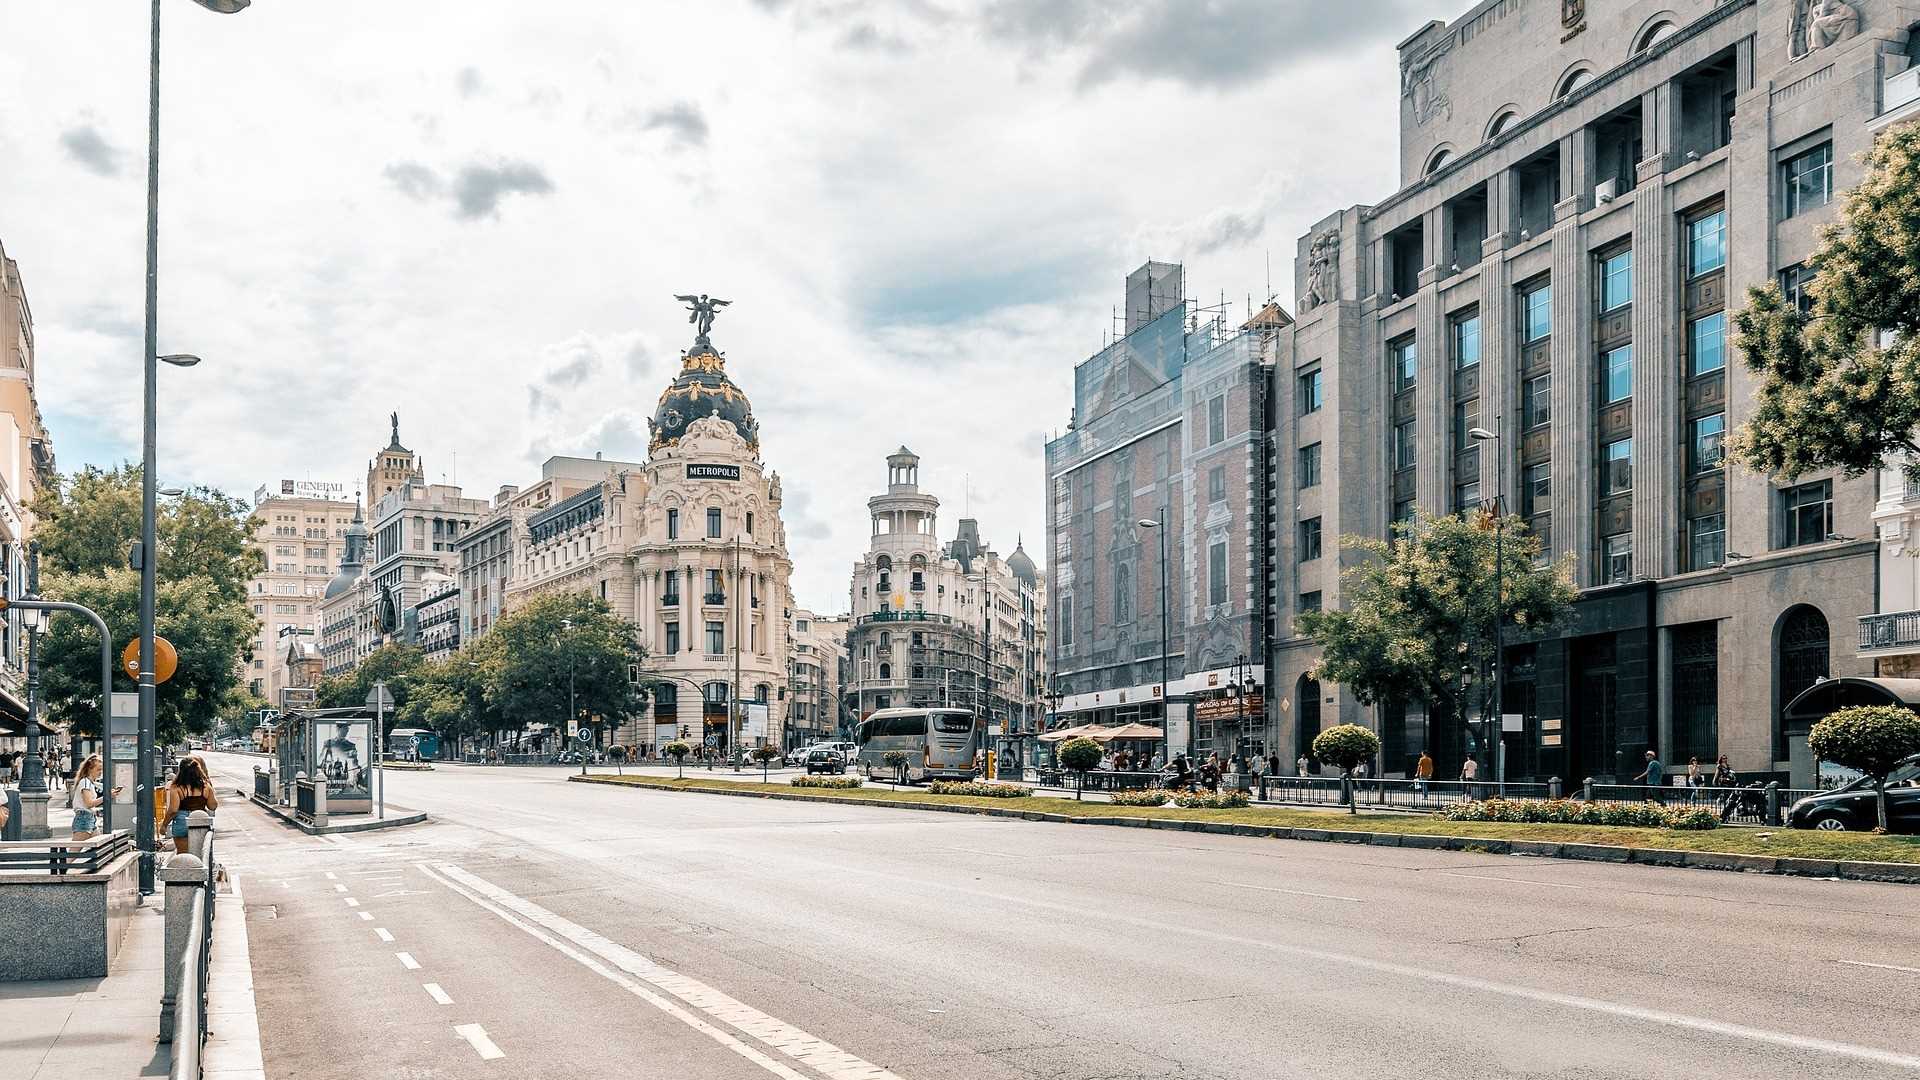 Madrid is the perfect city to organize Team Building events and activities.